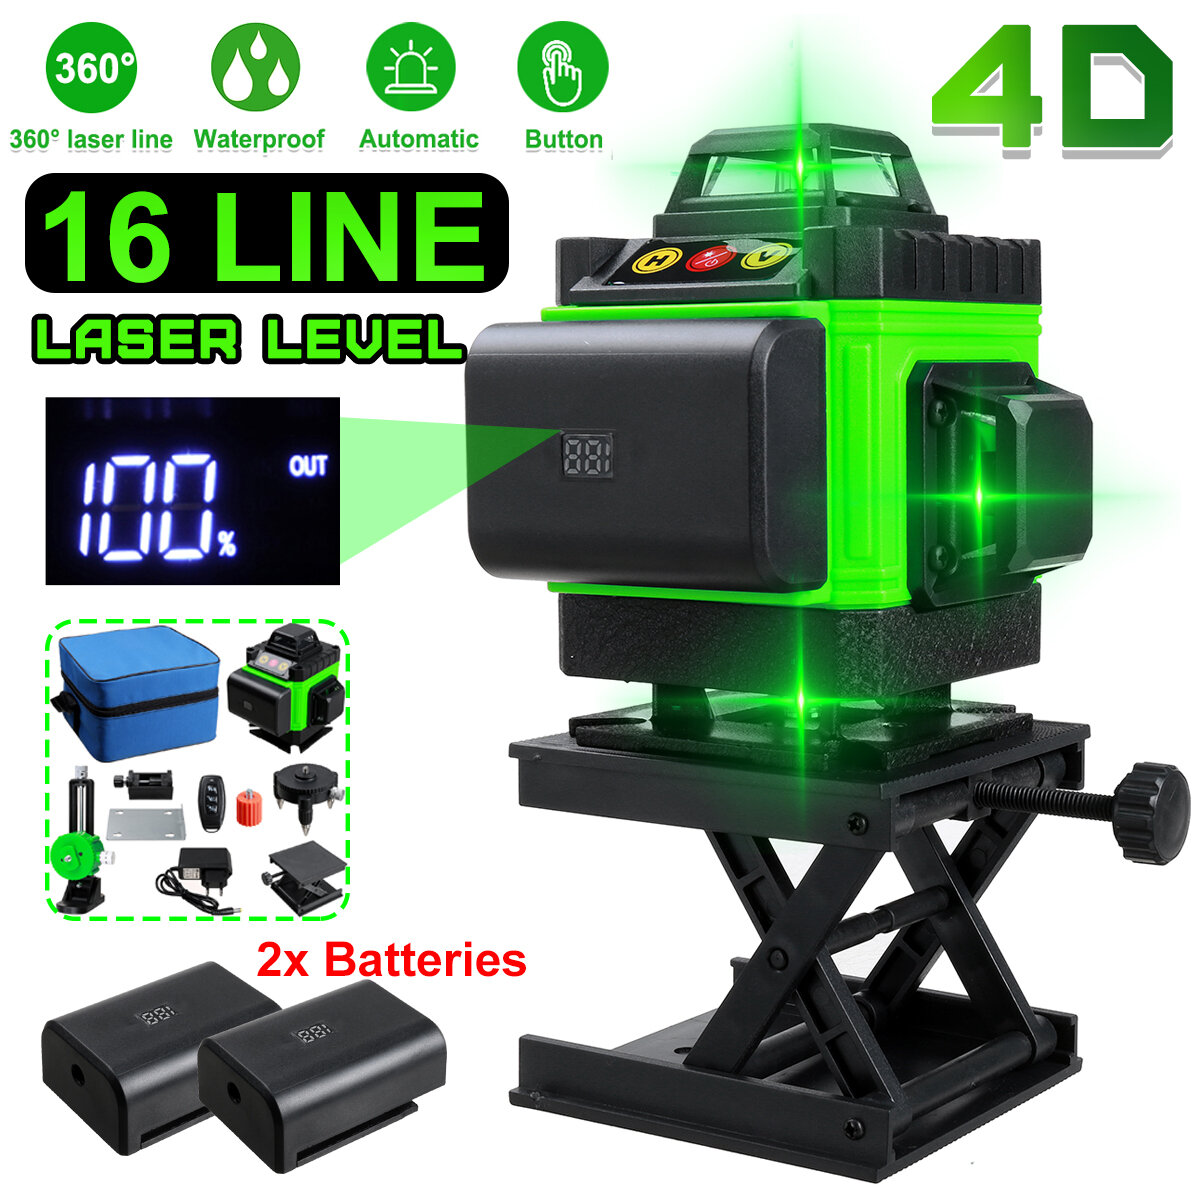 16 Lines 4D Laser Level, Green Laser Line, Self Leveling, Horizontal Lines &360 Degree Vertical Cross with 2xBattery for